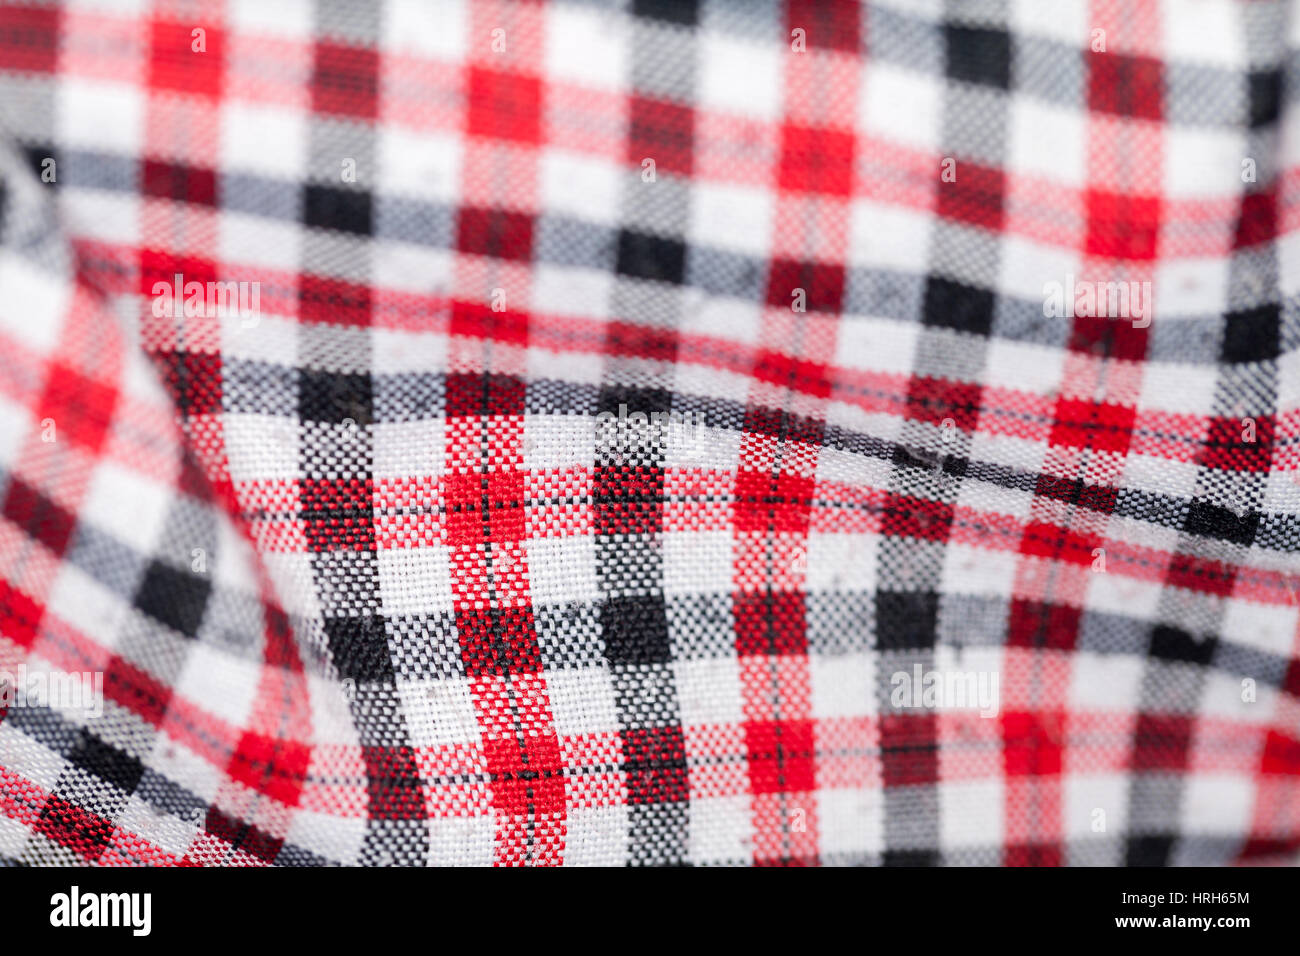 red, black and white checkered cotton texture Stock Photo